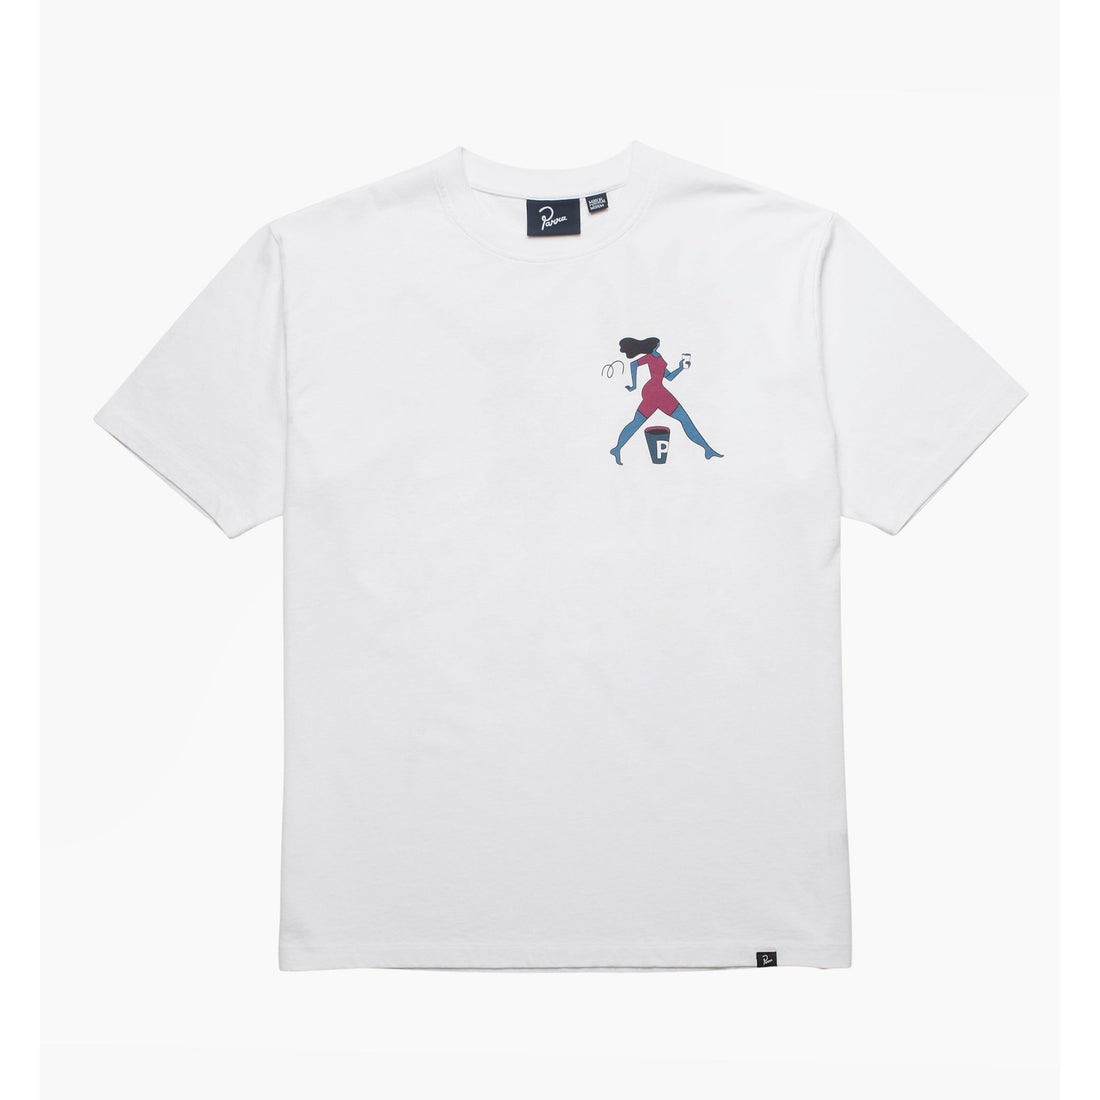 BY PARRA - QUESTIONING TEE - WHITE